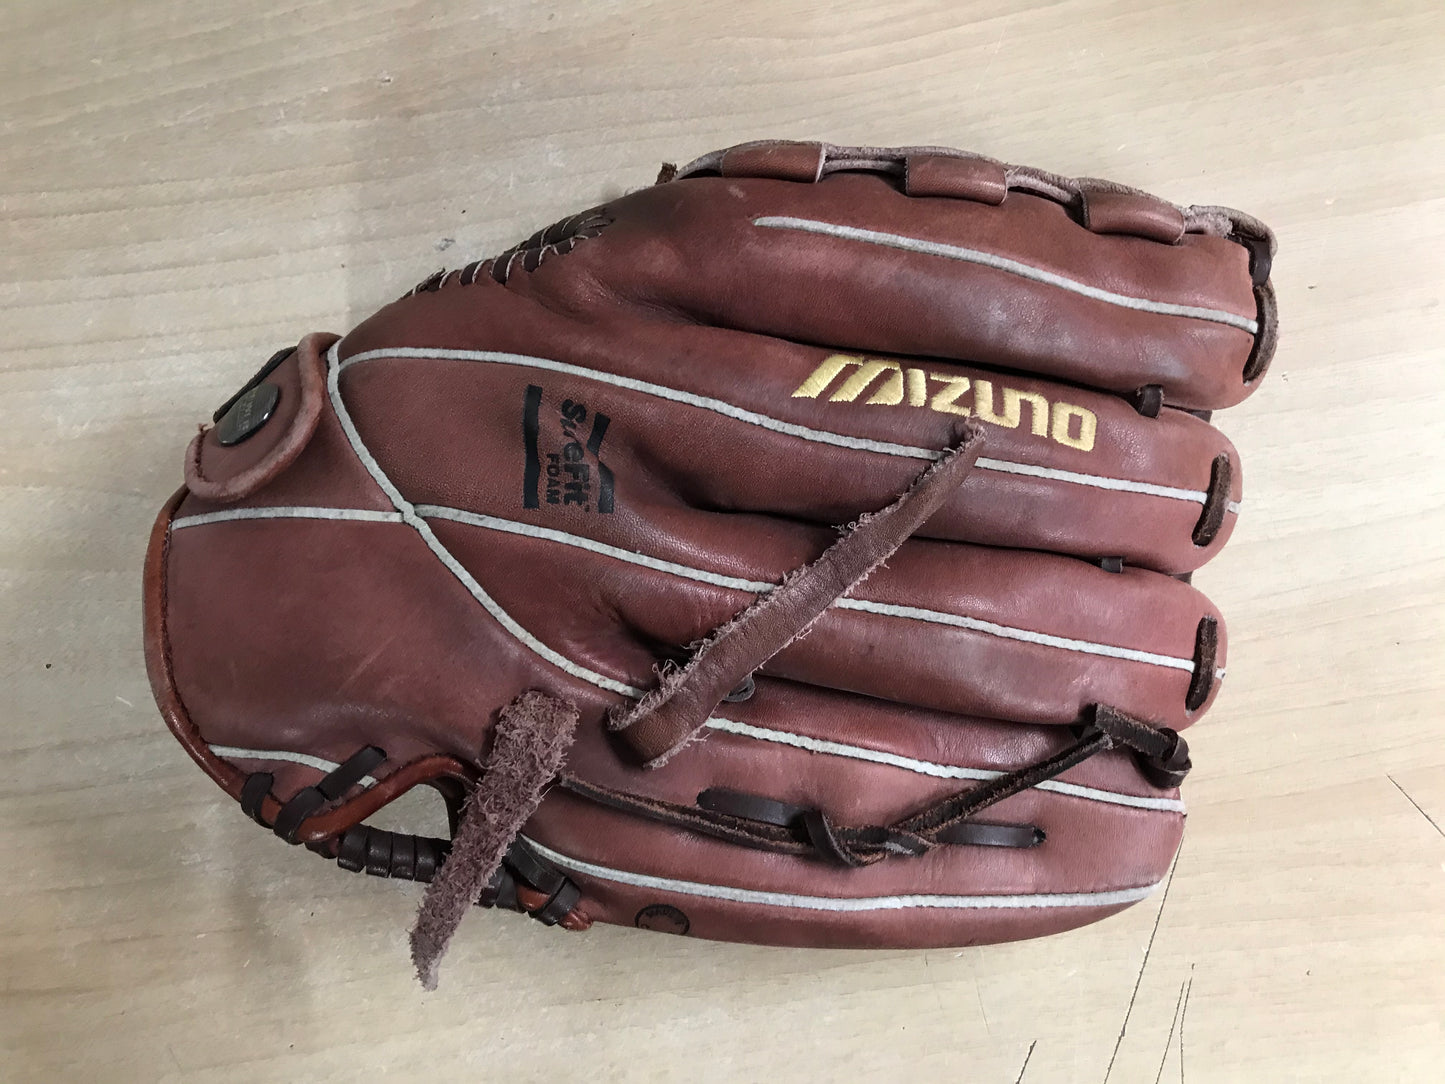 Baseball Glove Adult Size 12 inch Mizuno Brown Leather Fits on RIGHT Hand